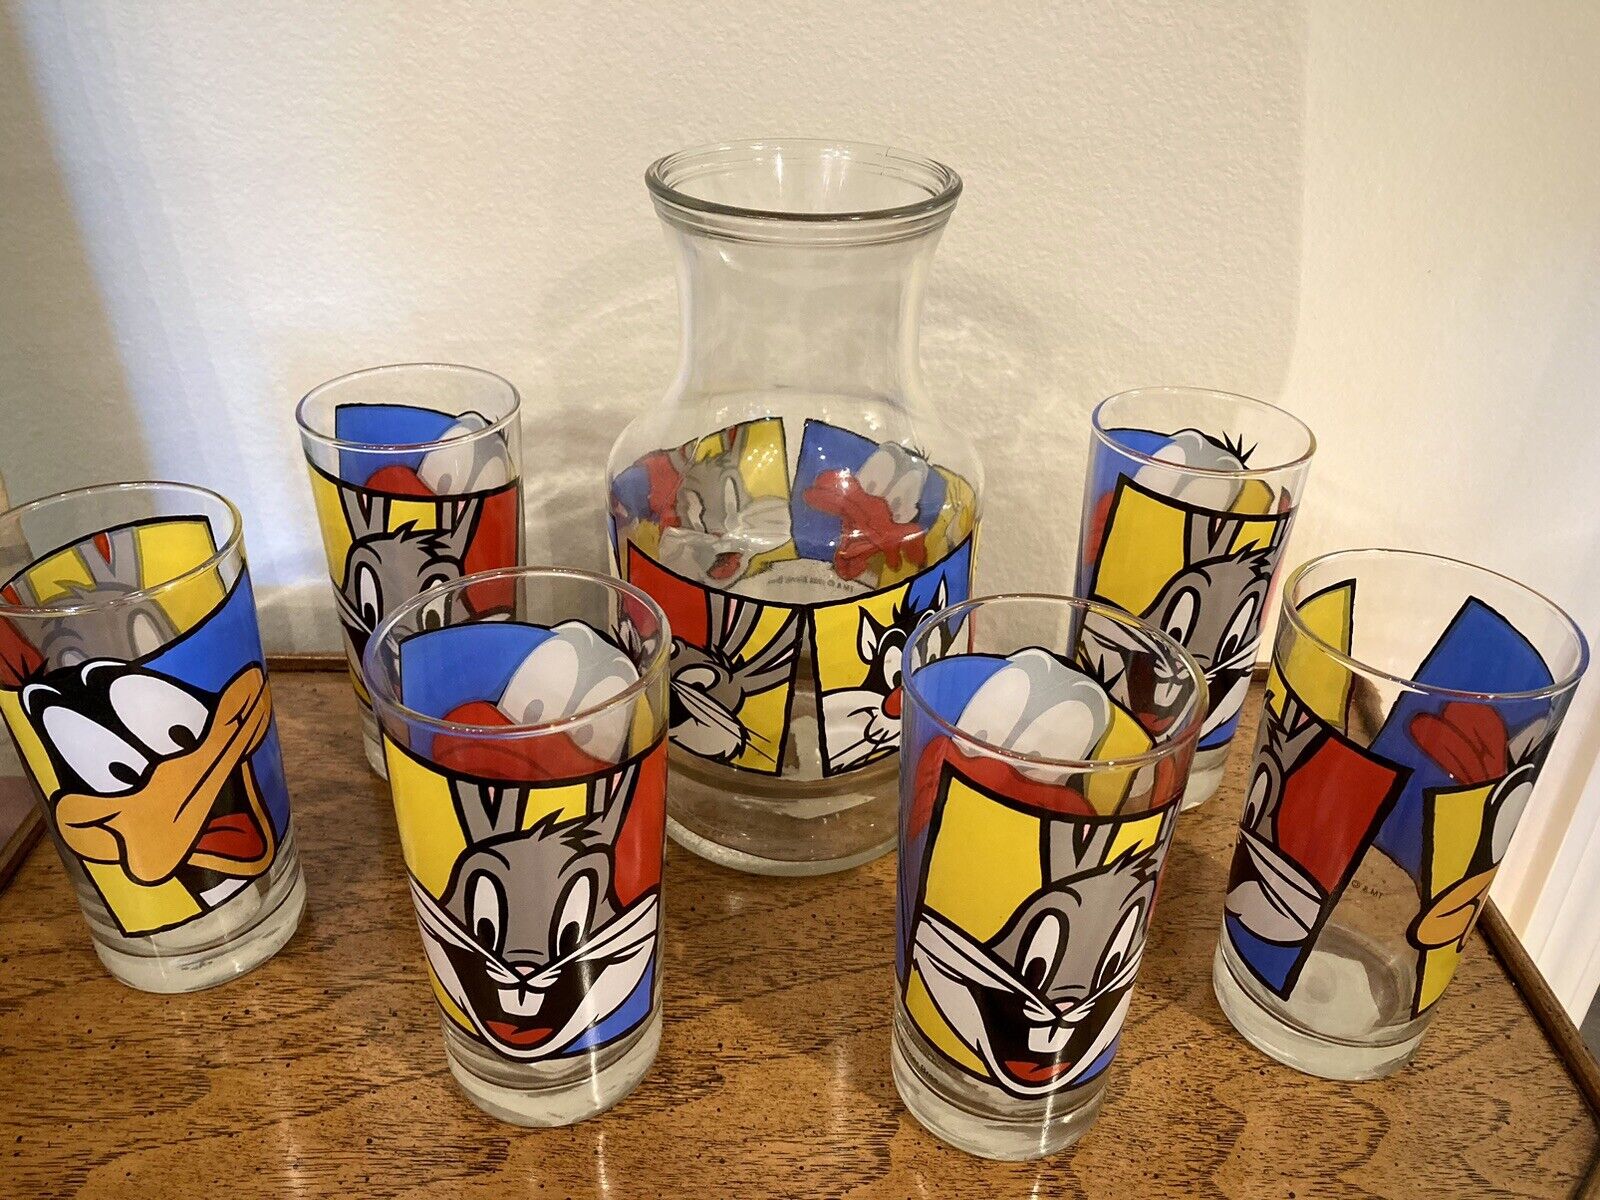 1994 Warner Bros Looney Tunes Bugs Bunny/Daffy Duck Set of 6 Glasses & Pitcher